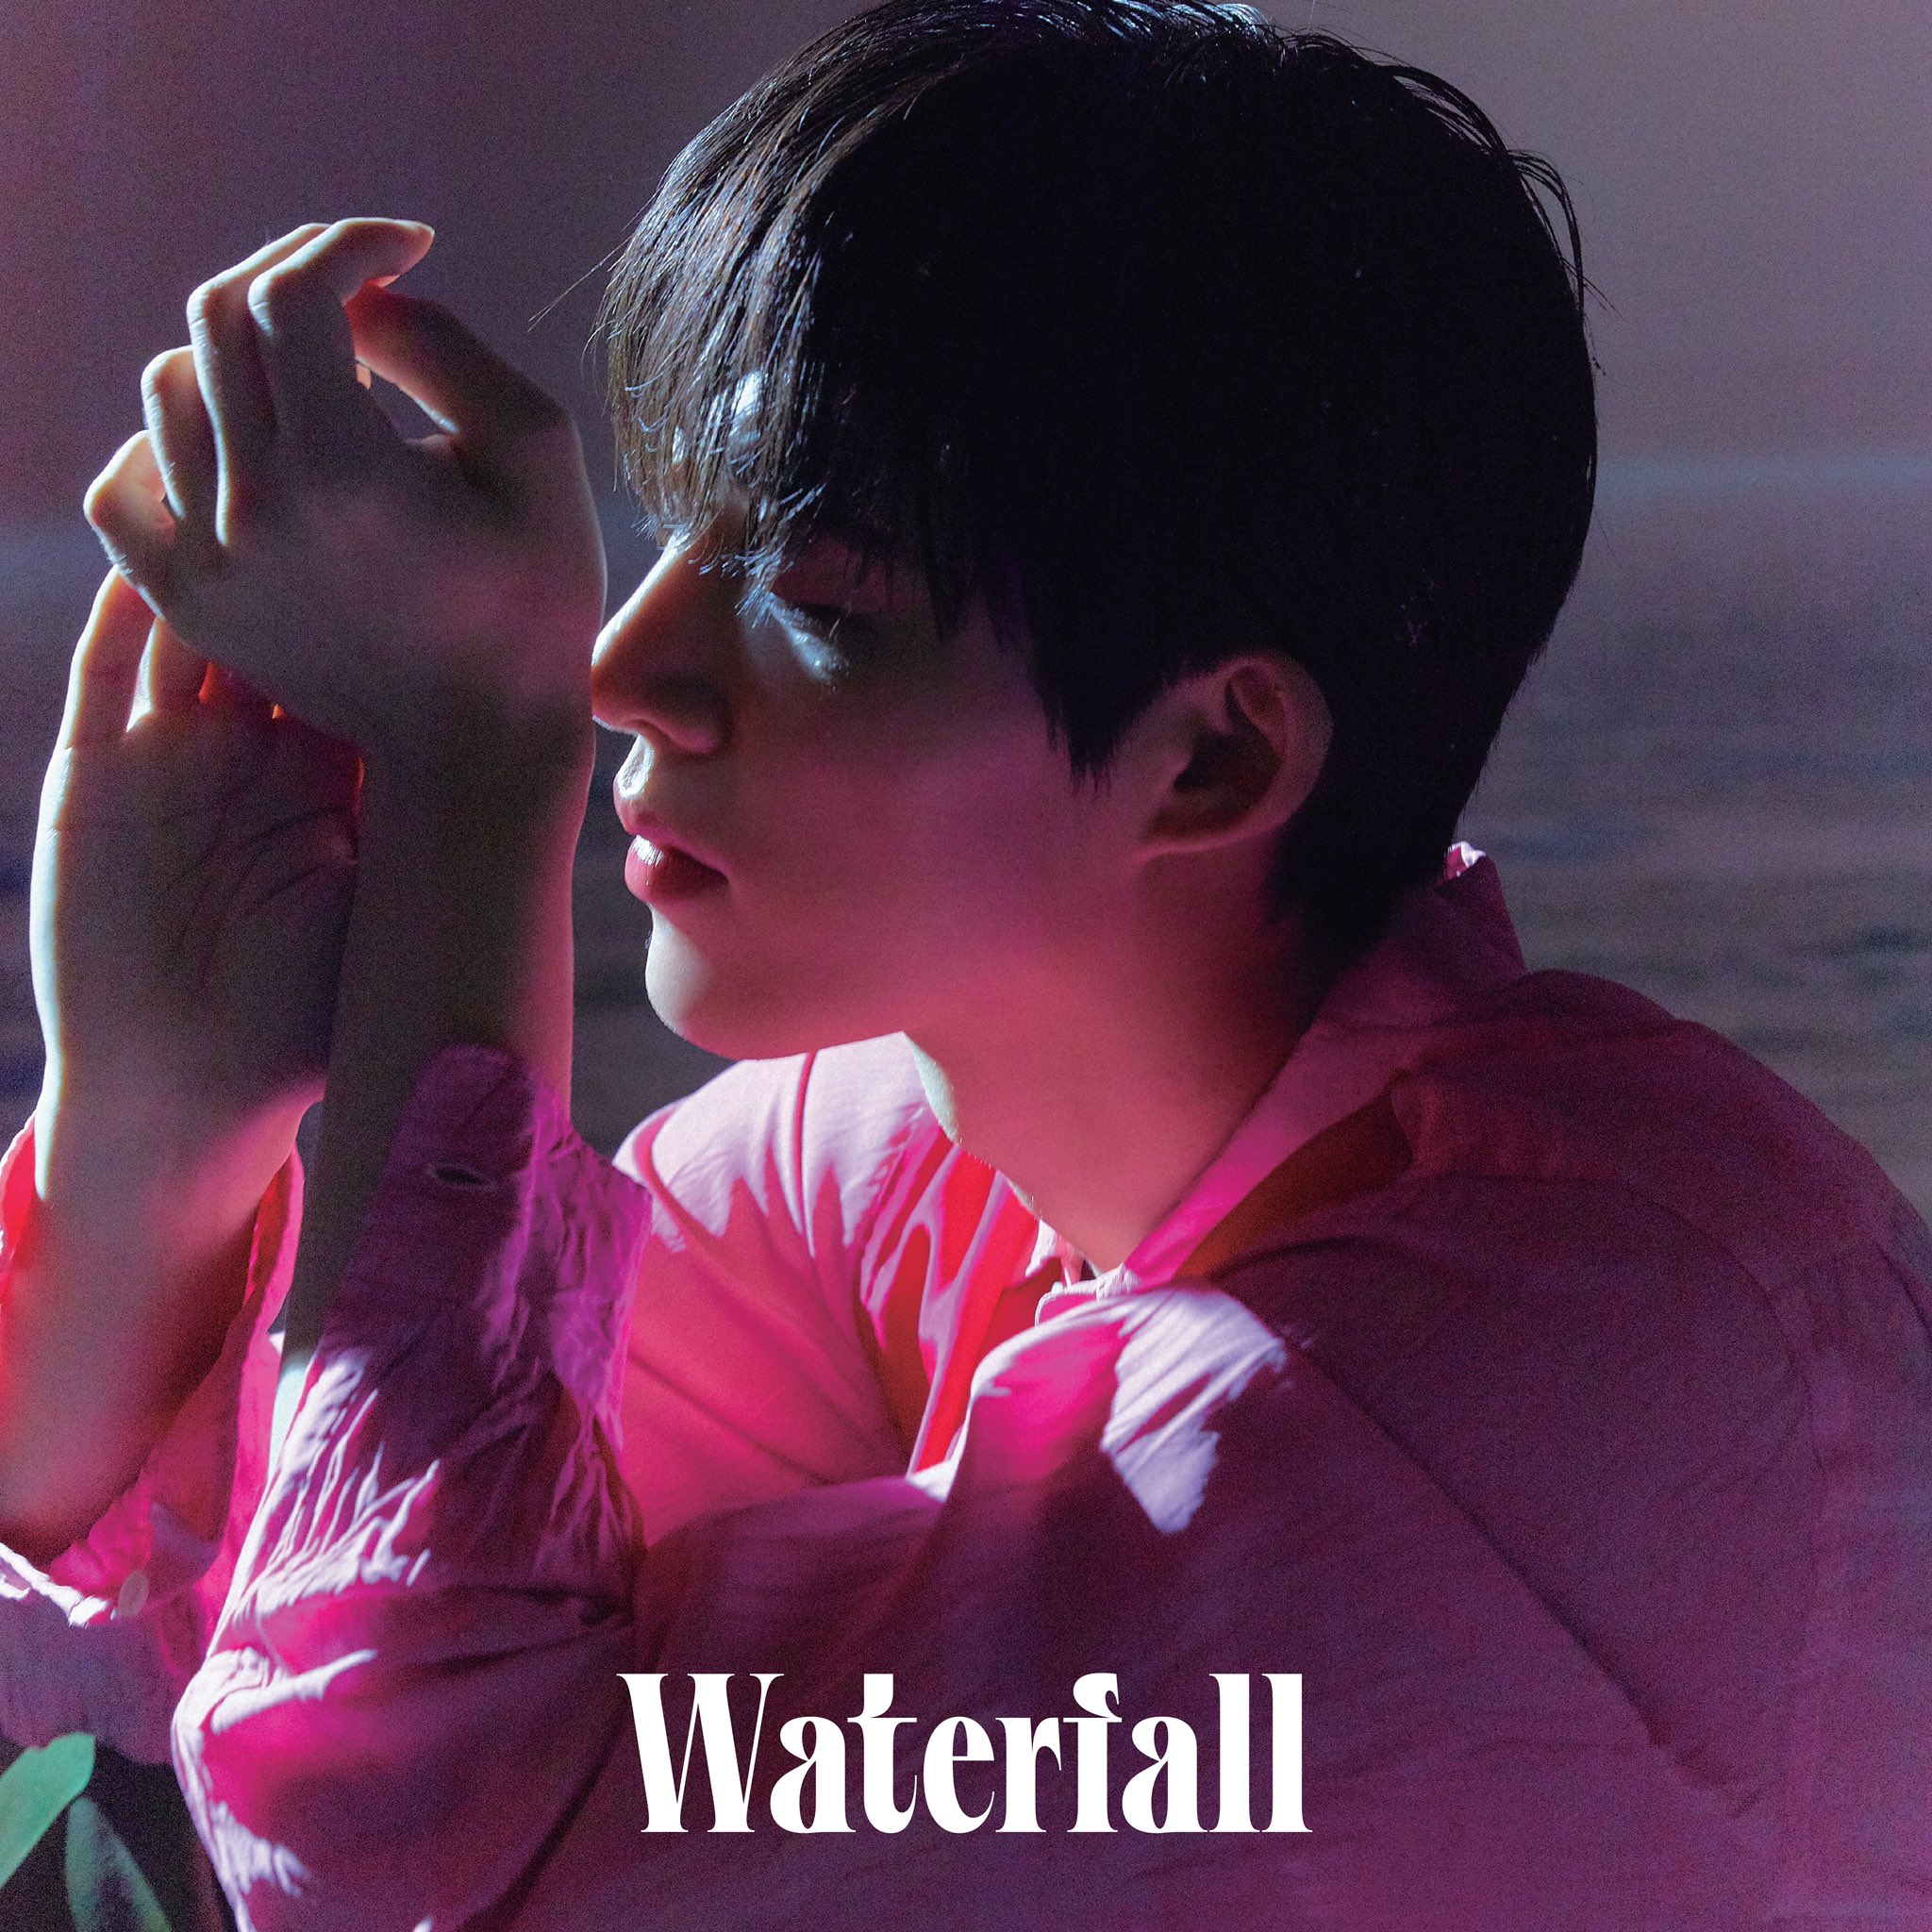 131LABEL OFFICIAL on Twitter: &quot;B.I 1ST FULL ALBUM 'WATERFALL' IS OUT NOW ON  ALL PLATFORMS B.I 1ST FULL ALBUM [WATERFALL] RELEASED STREAM NOW ON :  https://t.co/LwX1DoKypP #BI #비아이 #WATERFALL #해변 #illailla #1stfullalbum #